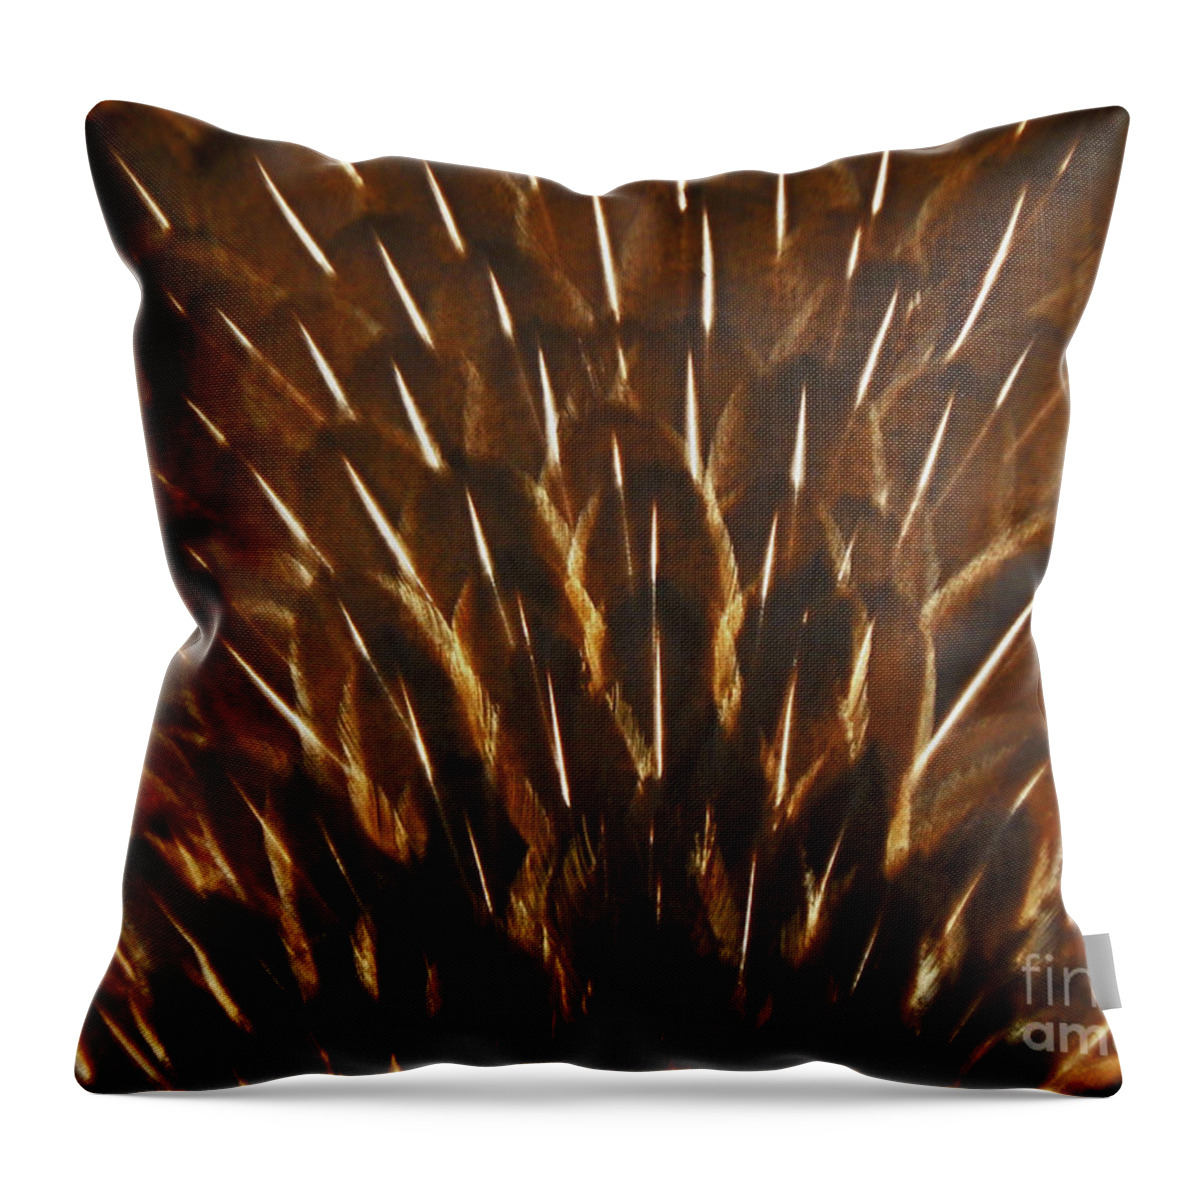 Wildlife Throw Pillow featuring the photograph Symmetry Of Nature by Jan Gelders